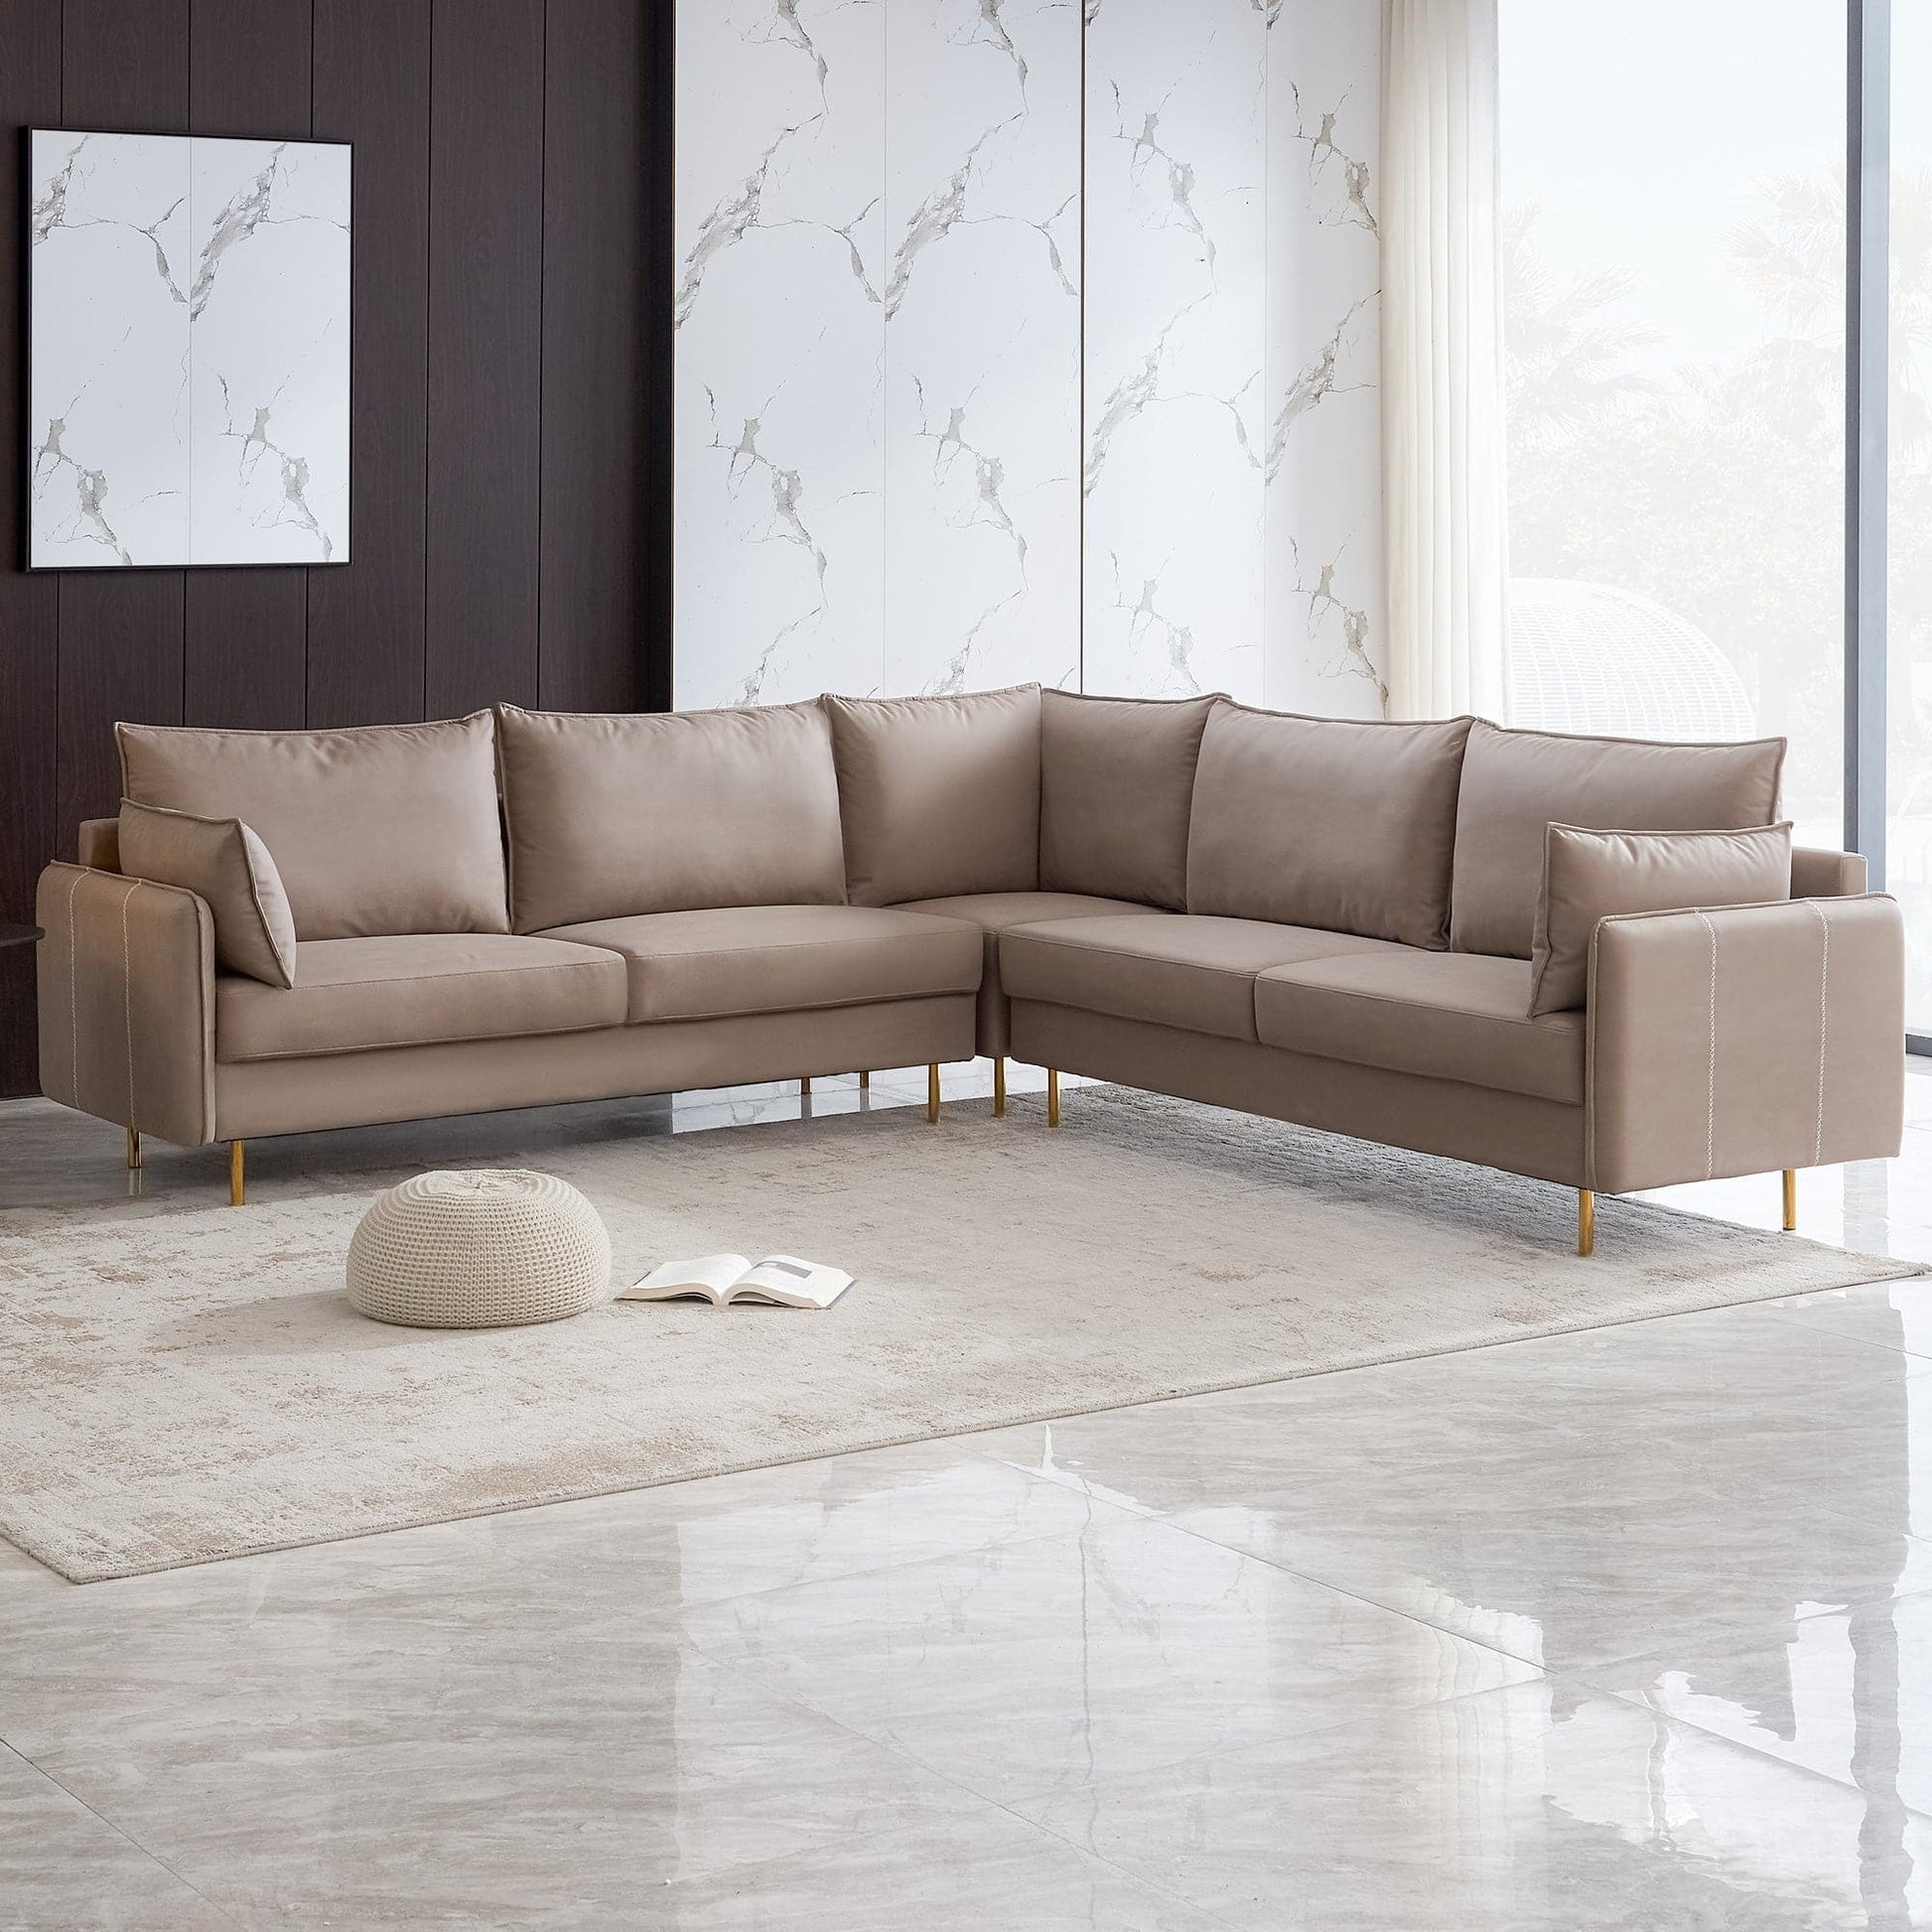 TFC&H Co. L-Shaped Corner Sectional Technical Leather Sofa - Beige- Ships from The US - sectional at TFC&H Co.